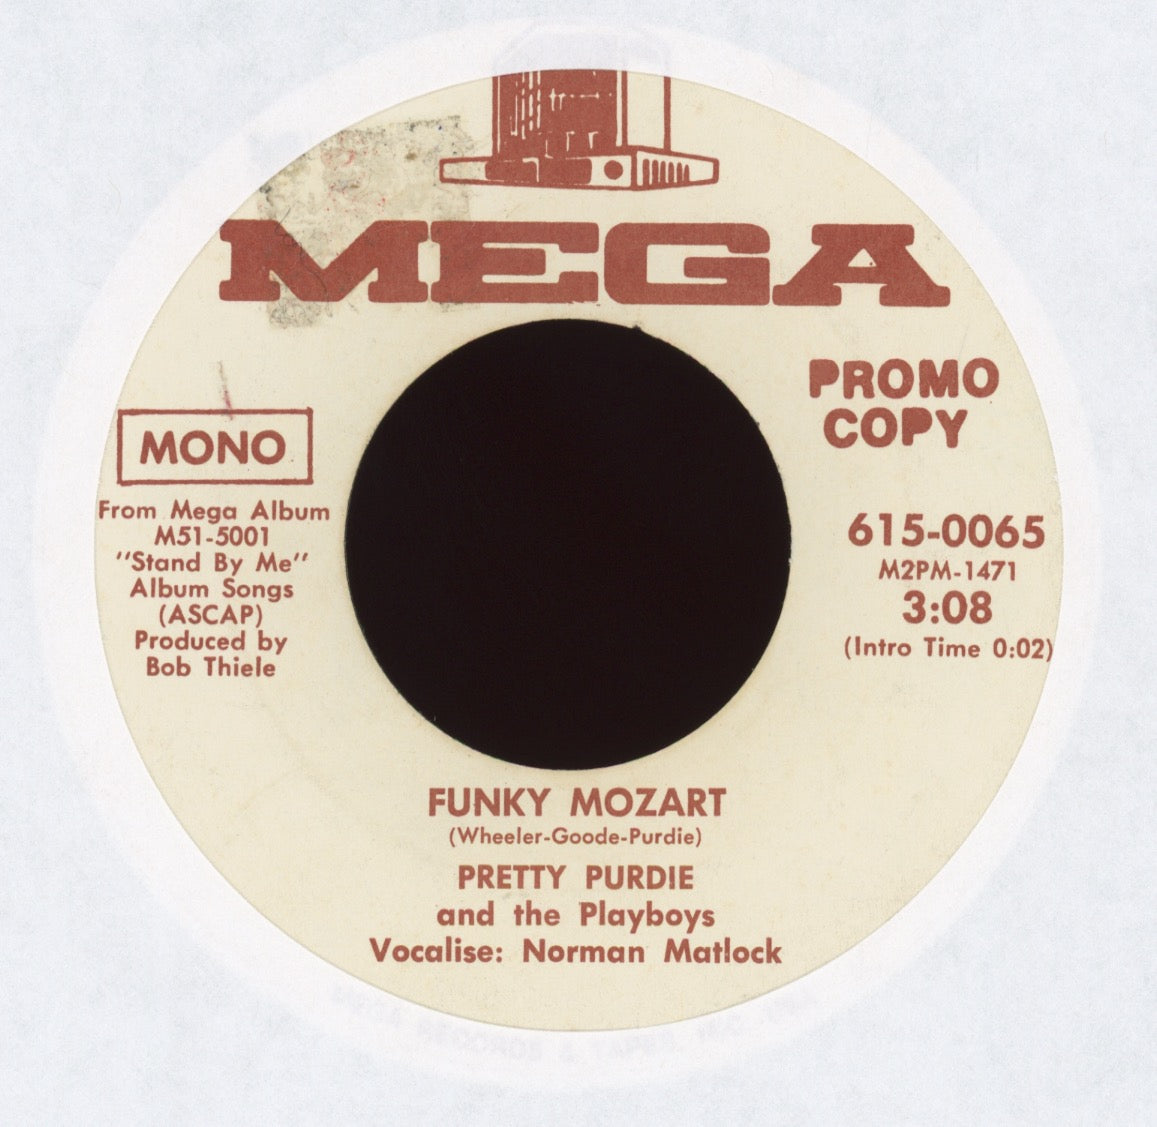 Pretty Purdie And The Playboys - Funky Mozart on Mega Promo